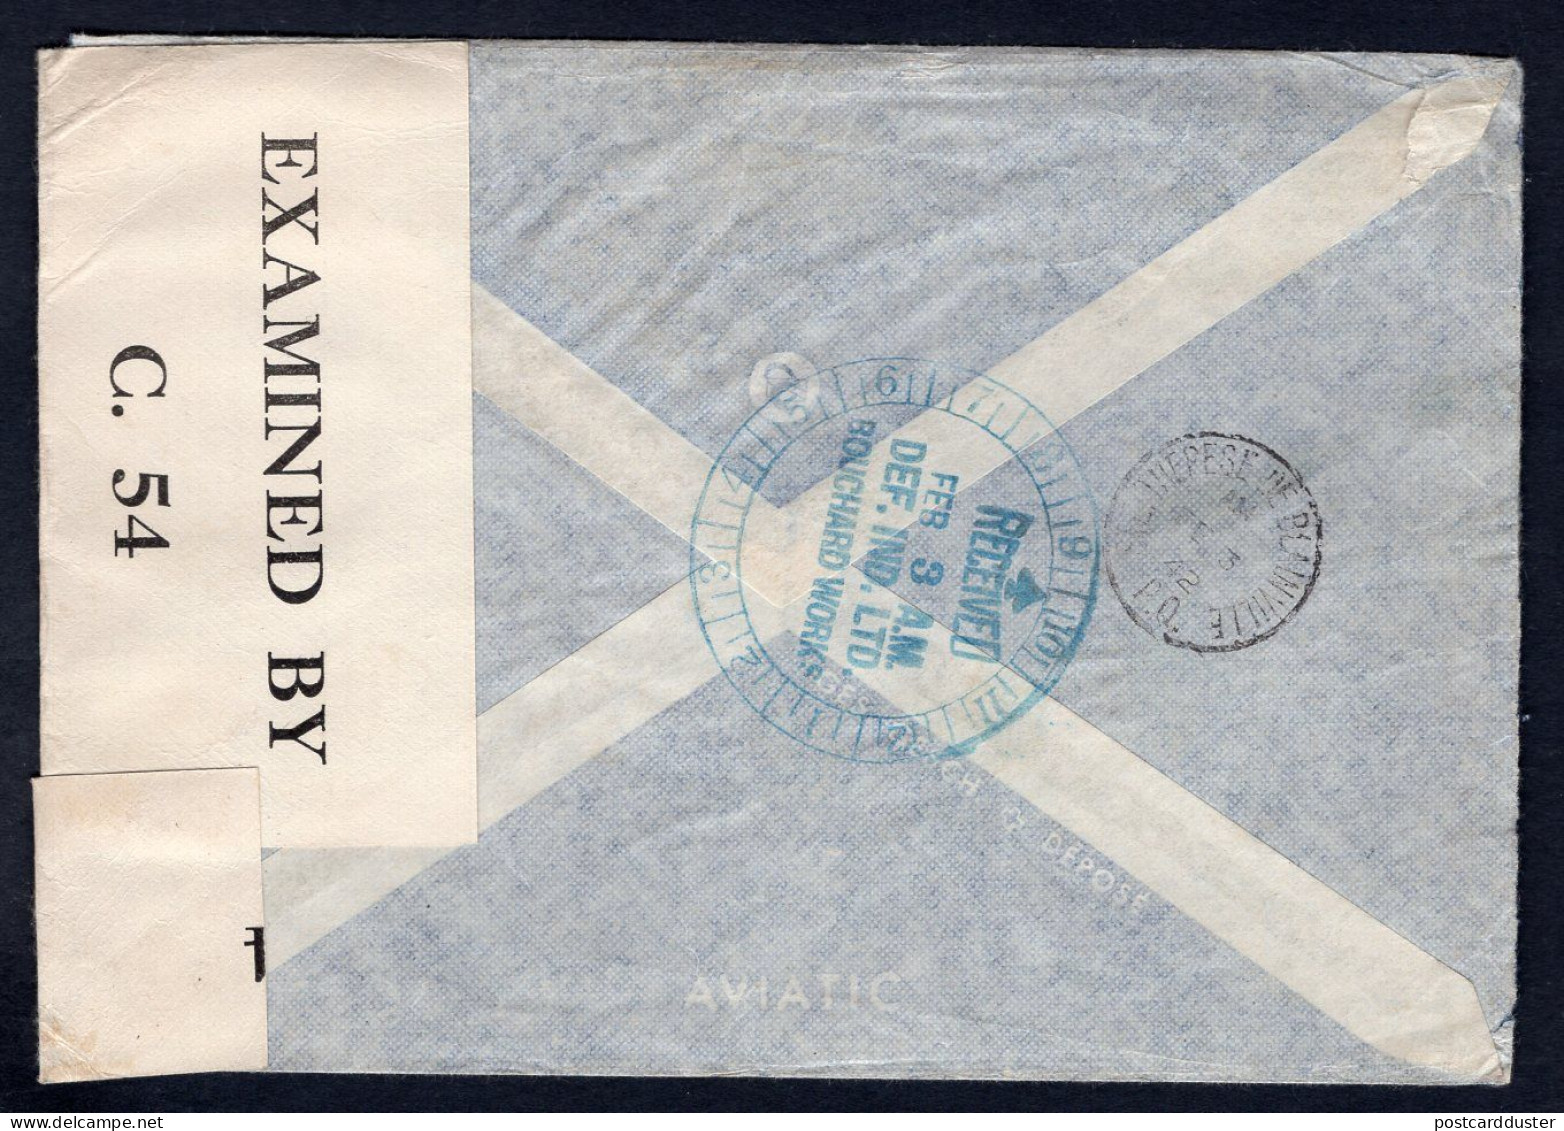 SWITZERLAND 1942 Censored Airmail Cover To Canada, Via Lisbon Portugal (p854) - Covers & Documents